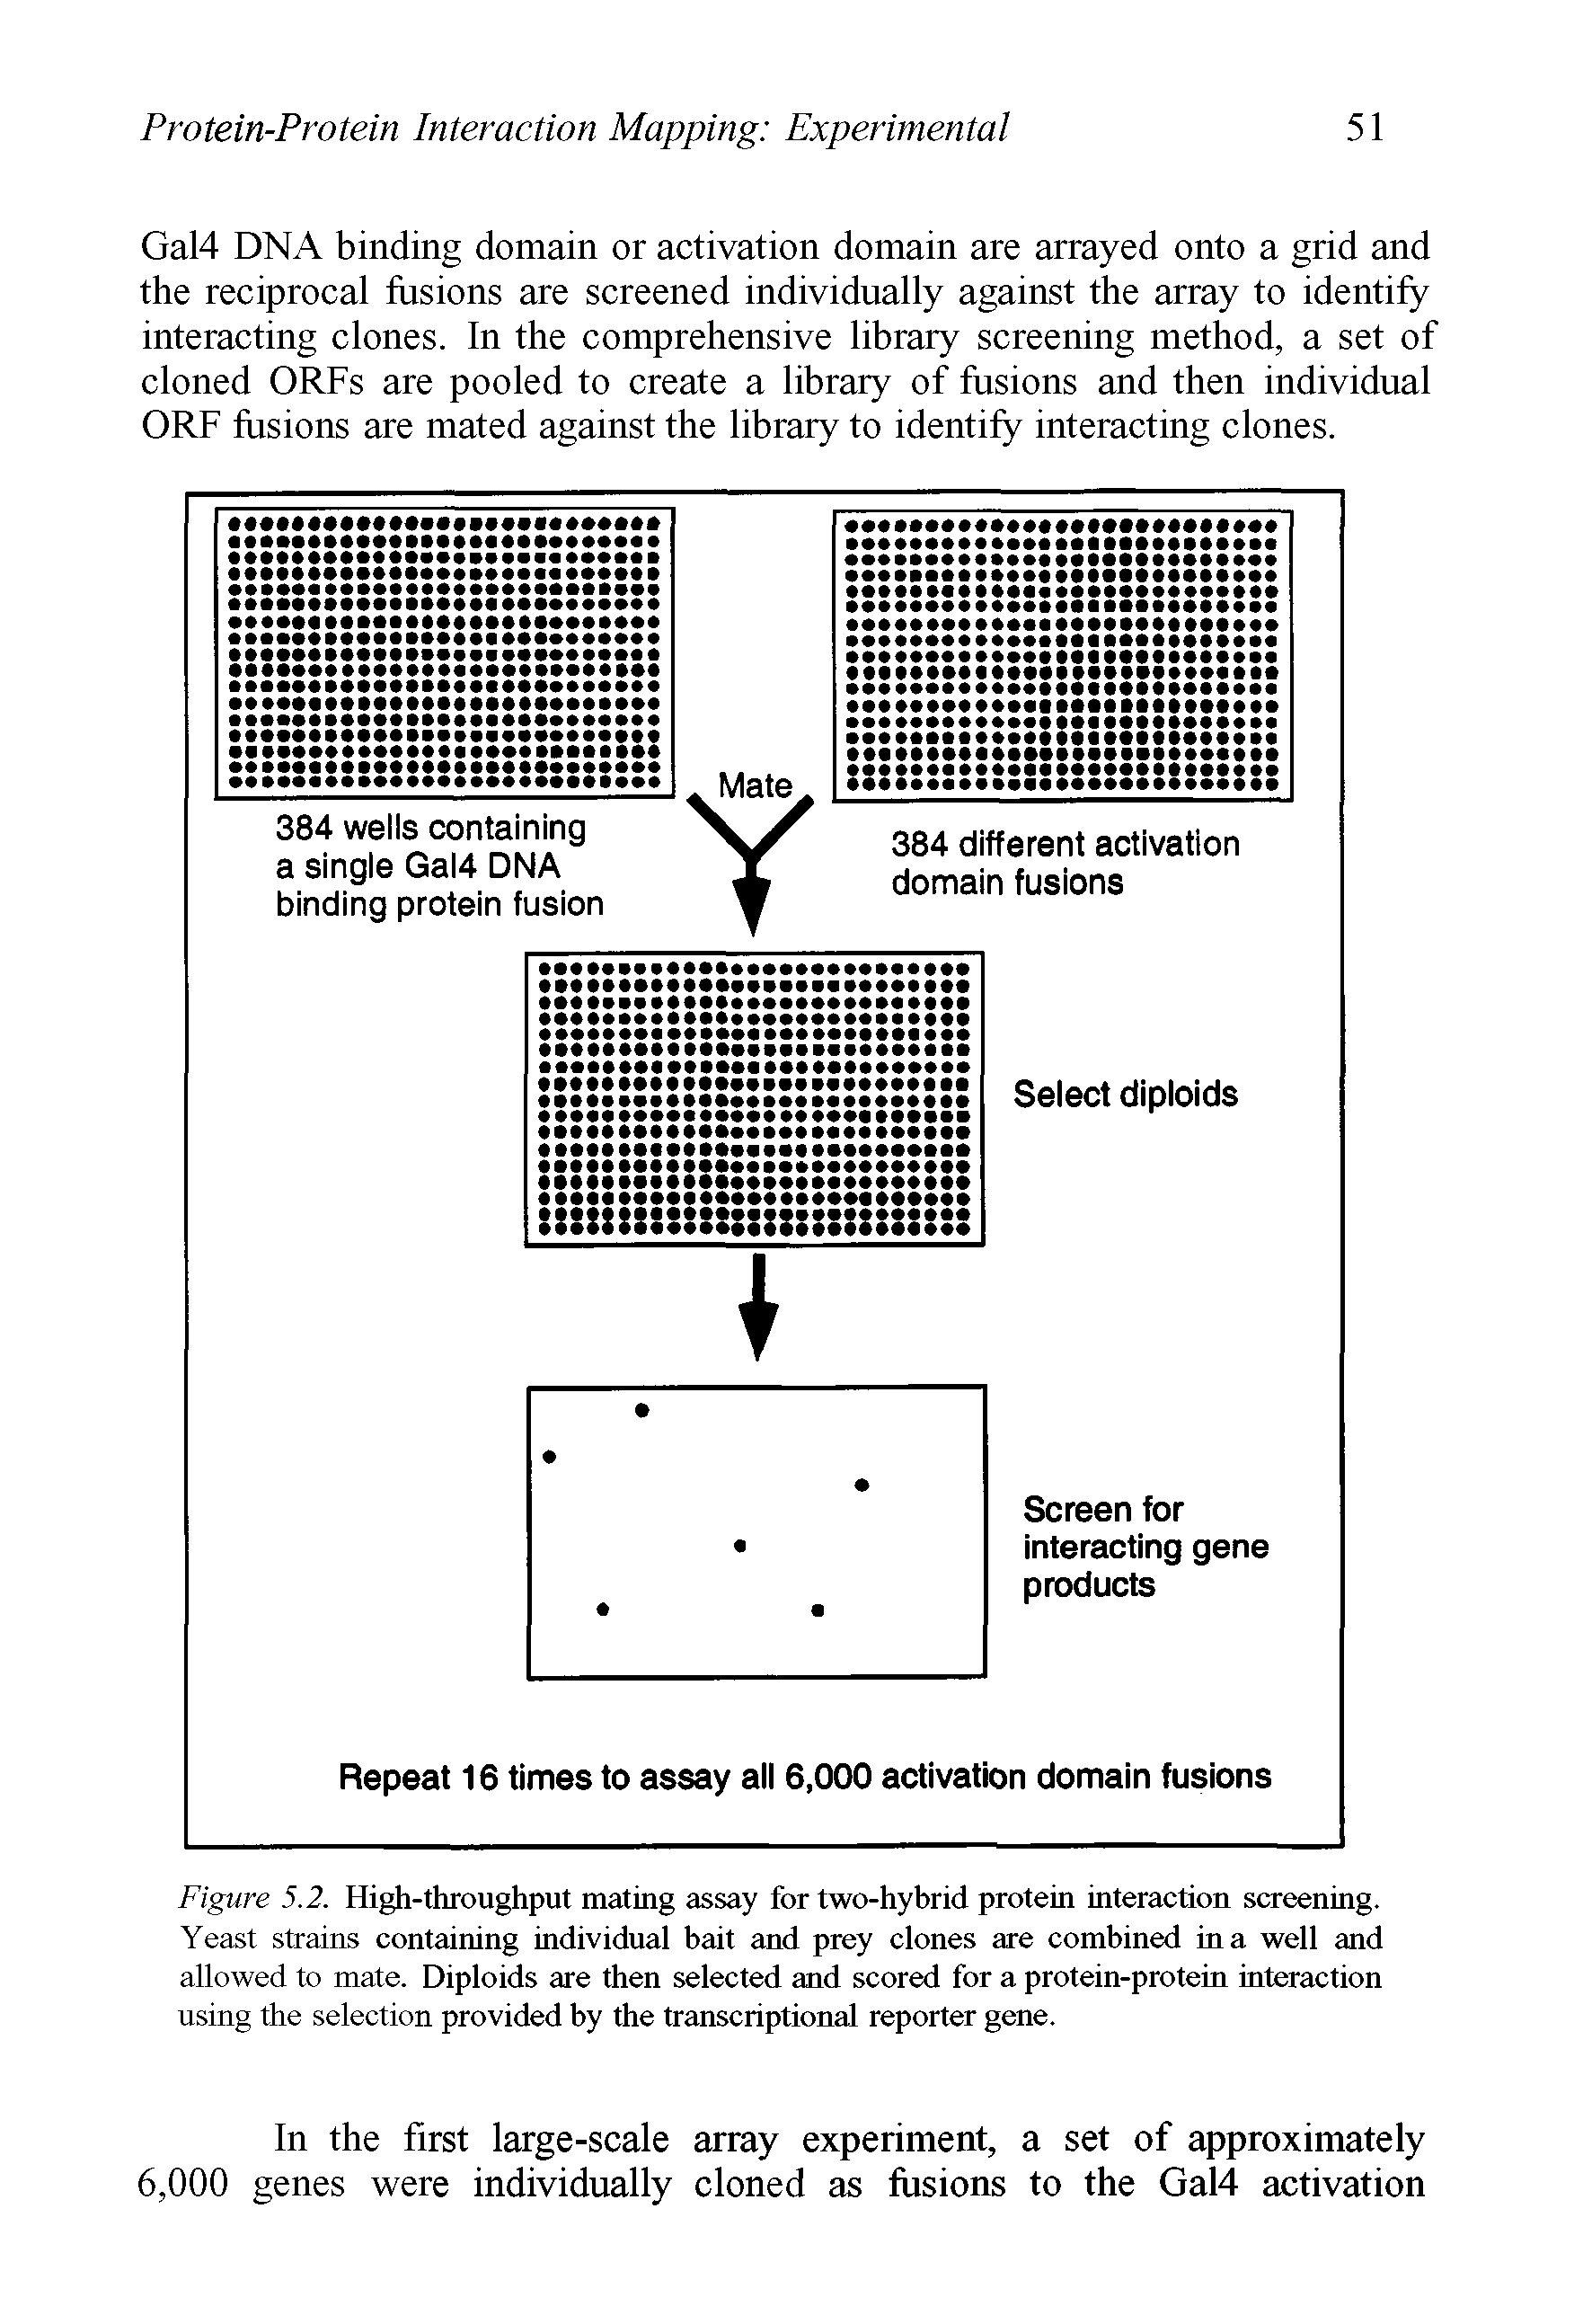 Figure 5.2. High-throughput mating assay for two-hybrid protein interaction screening. Yeast strains containing individual bait and prey clones are combined in a well and allowed to mate. Diploids are then selected and scored for a protein-protein interaction using the selection provided by the transcriptional reporter gene.